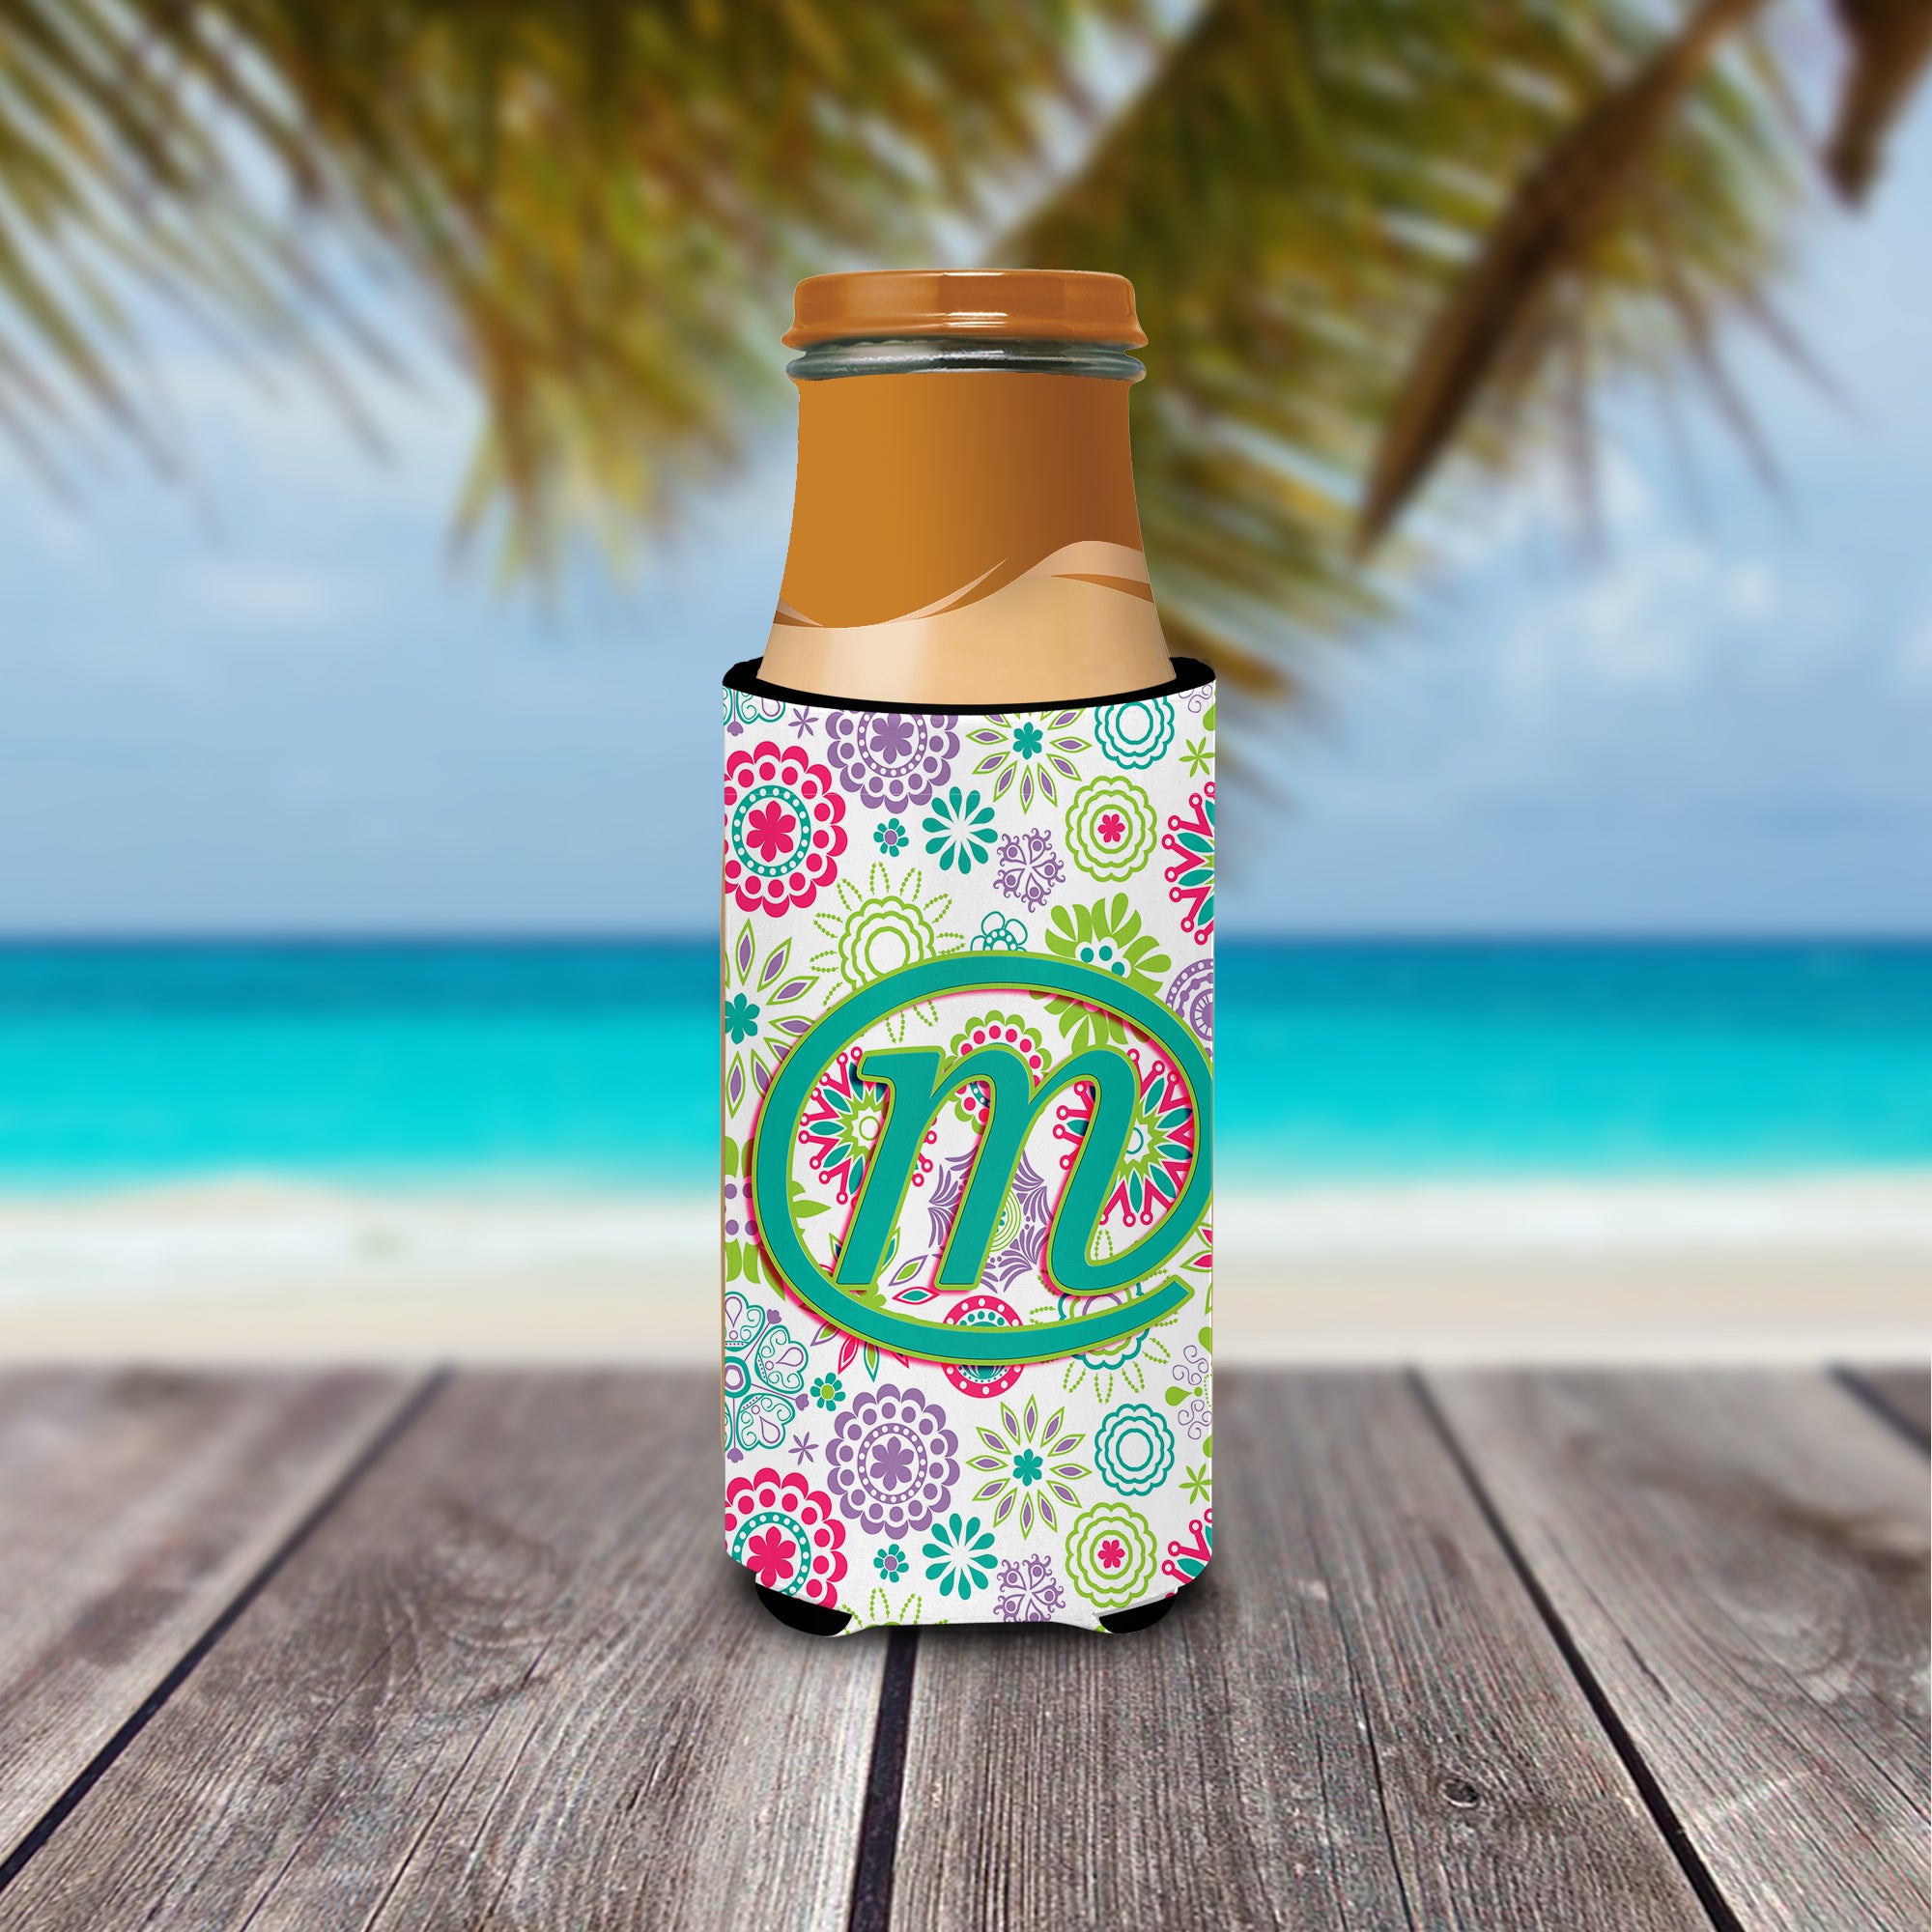 Letter M Flowers Pink Teal Green Initial Ultra Beverage Insulators for slim cans CJ2011-MMUK